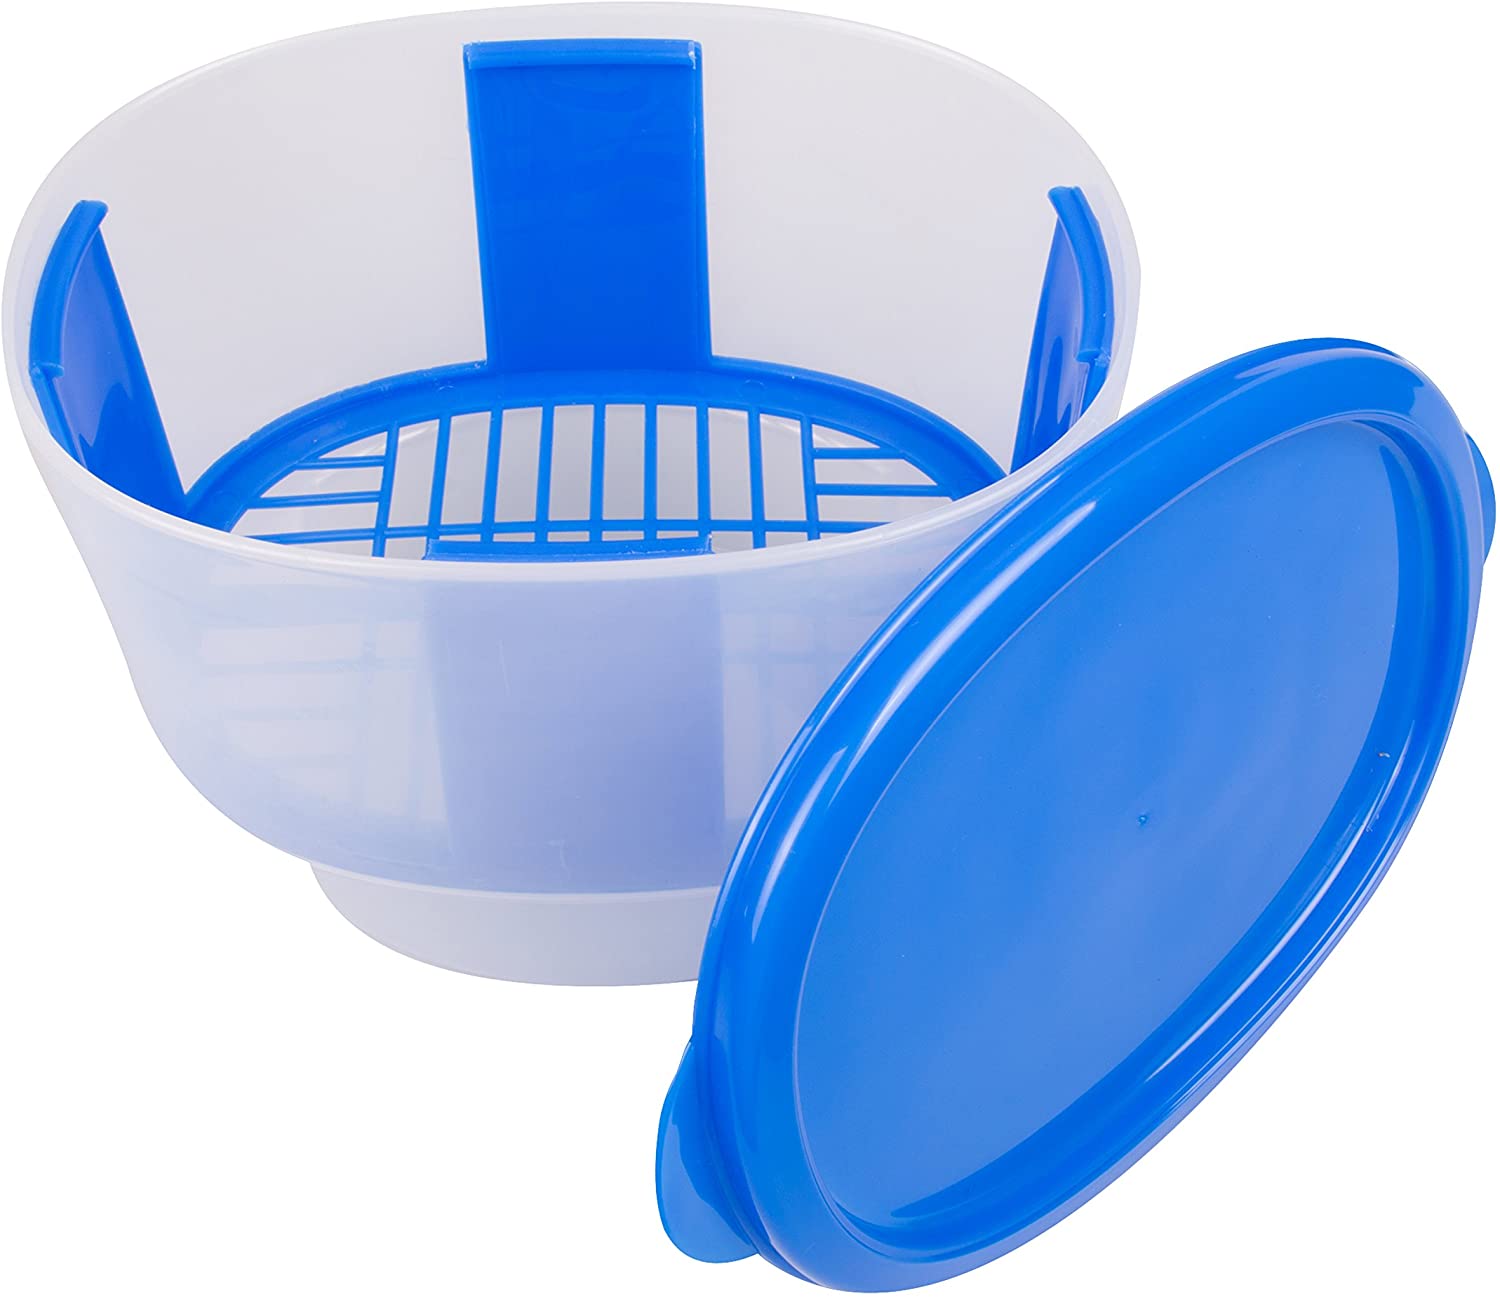 The Original Breader Bowl- All-in-One Mess Free Batter Breading at Home or On-the-Go